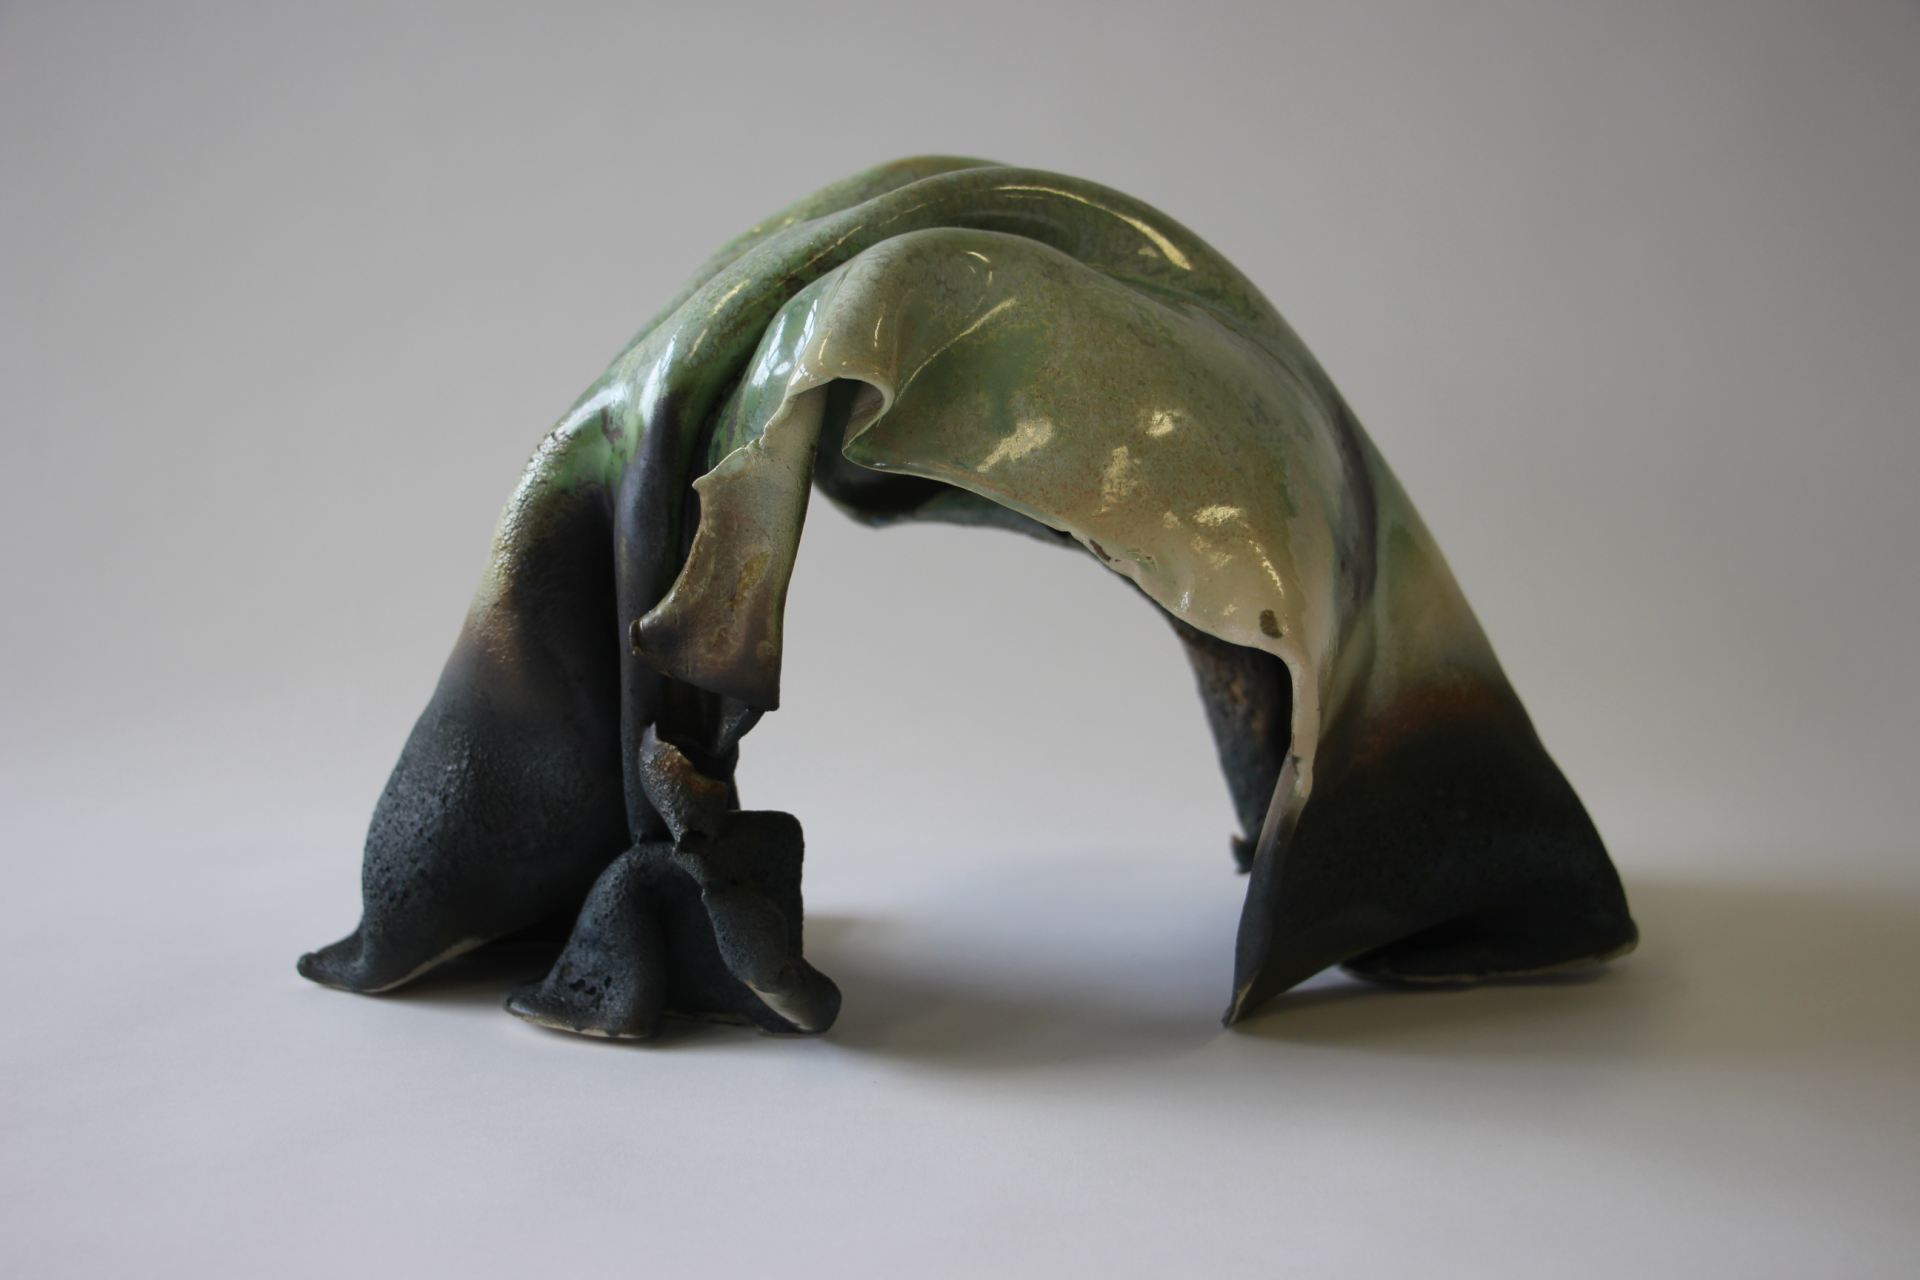 A photo of an abstract sculpture of an arch in green and black.